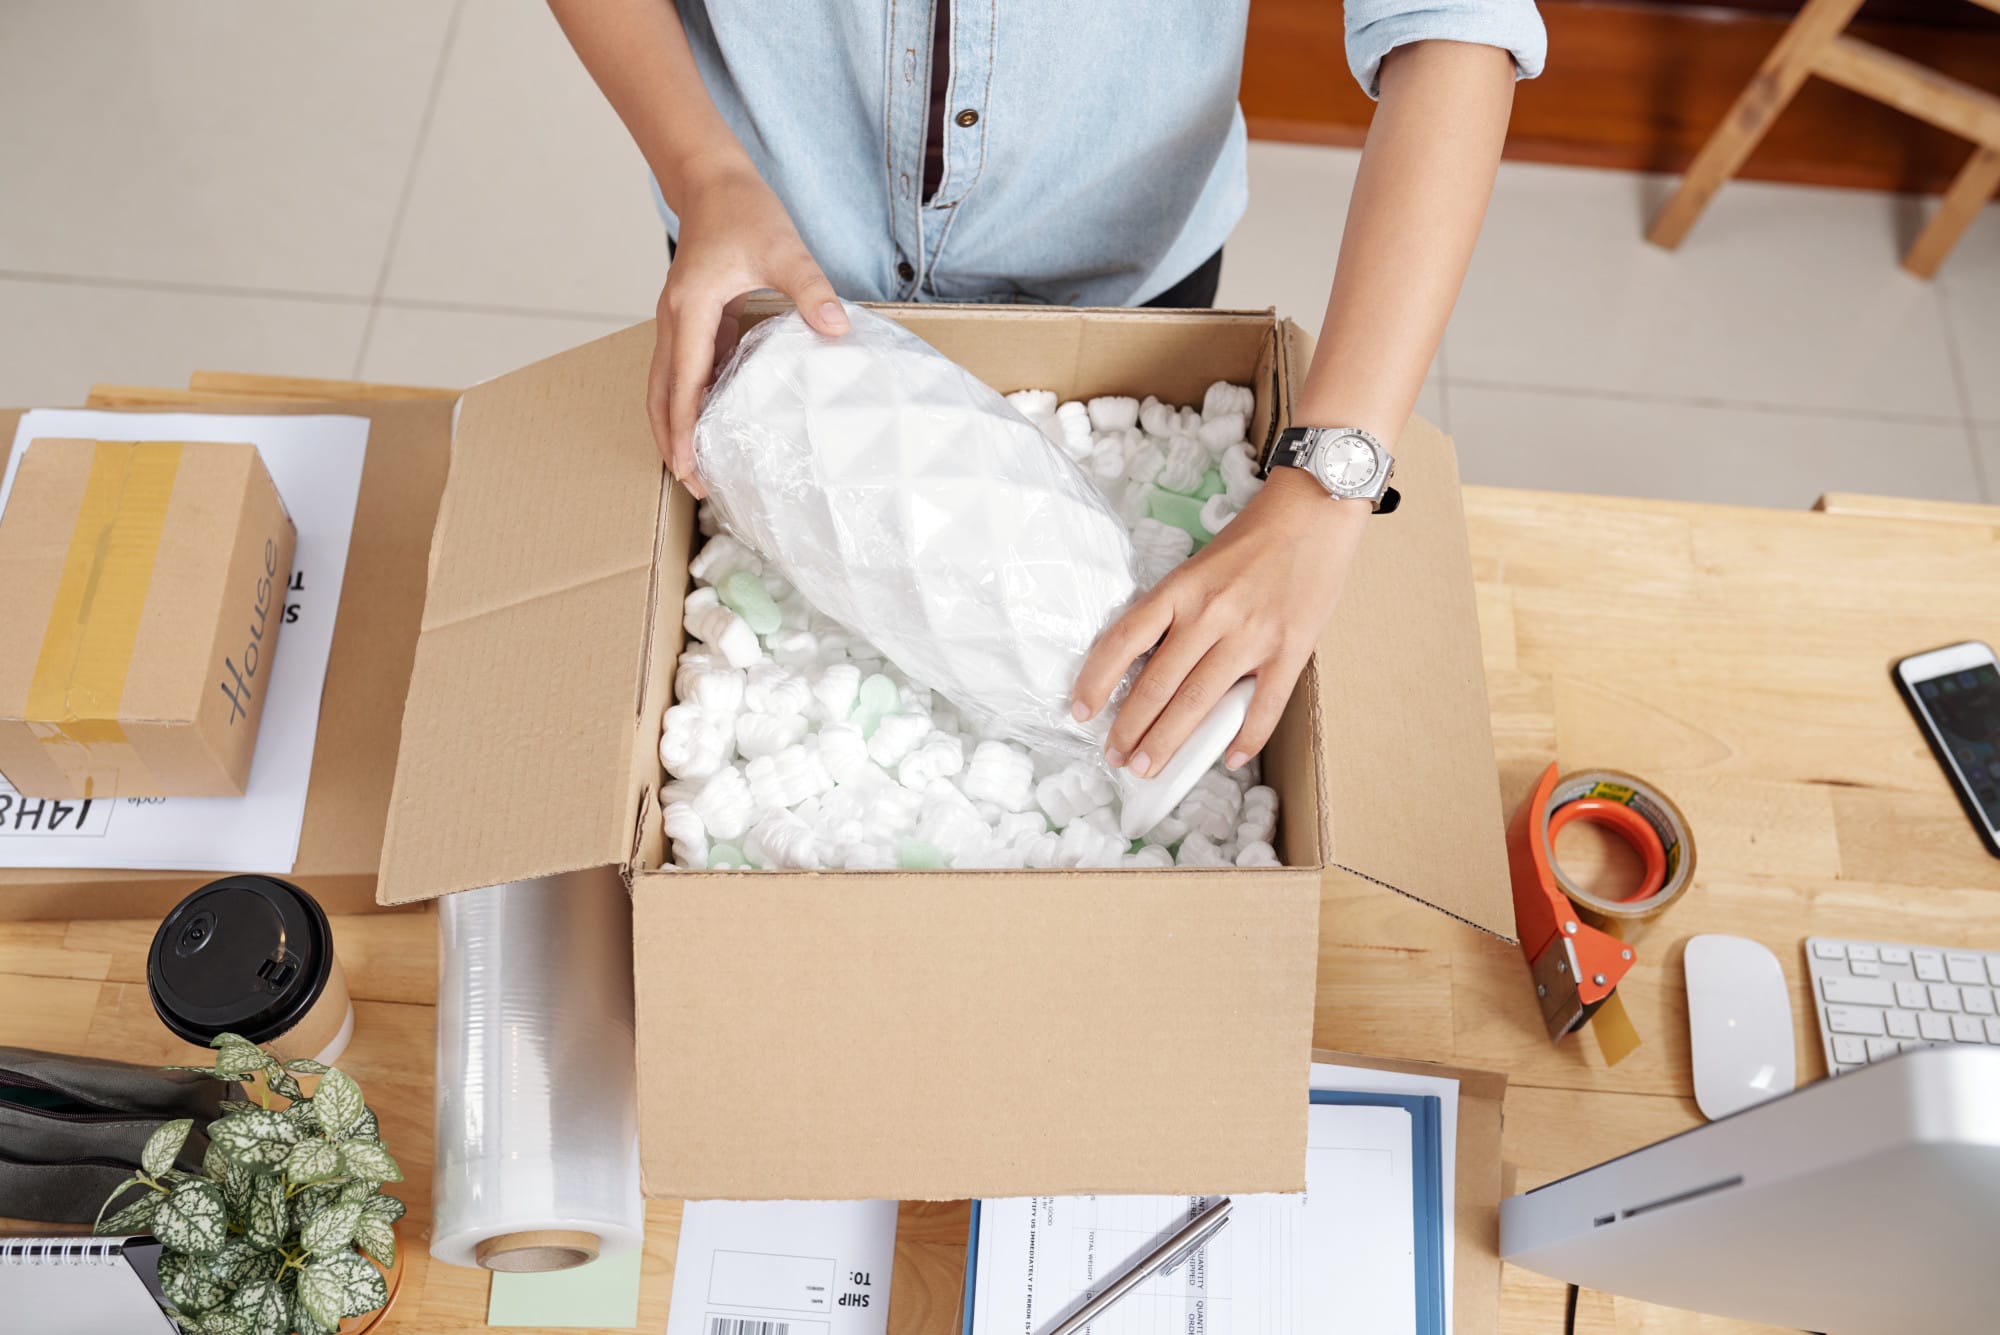 Packaging mistakes during a move